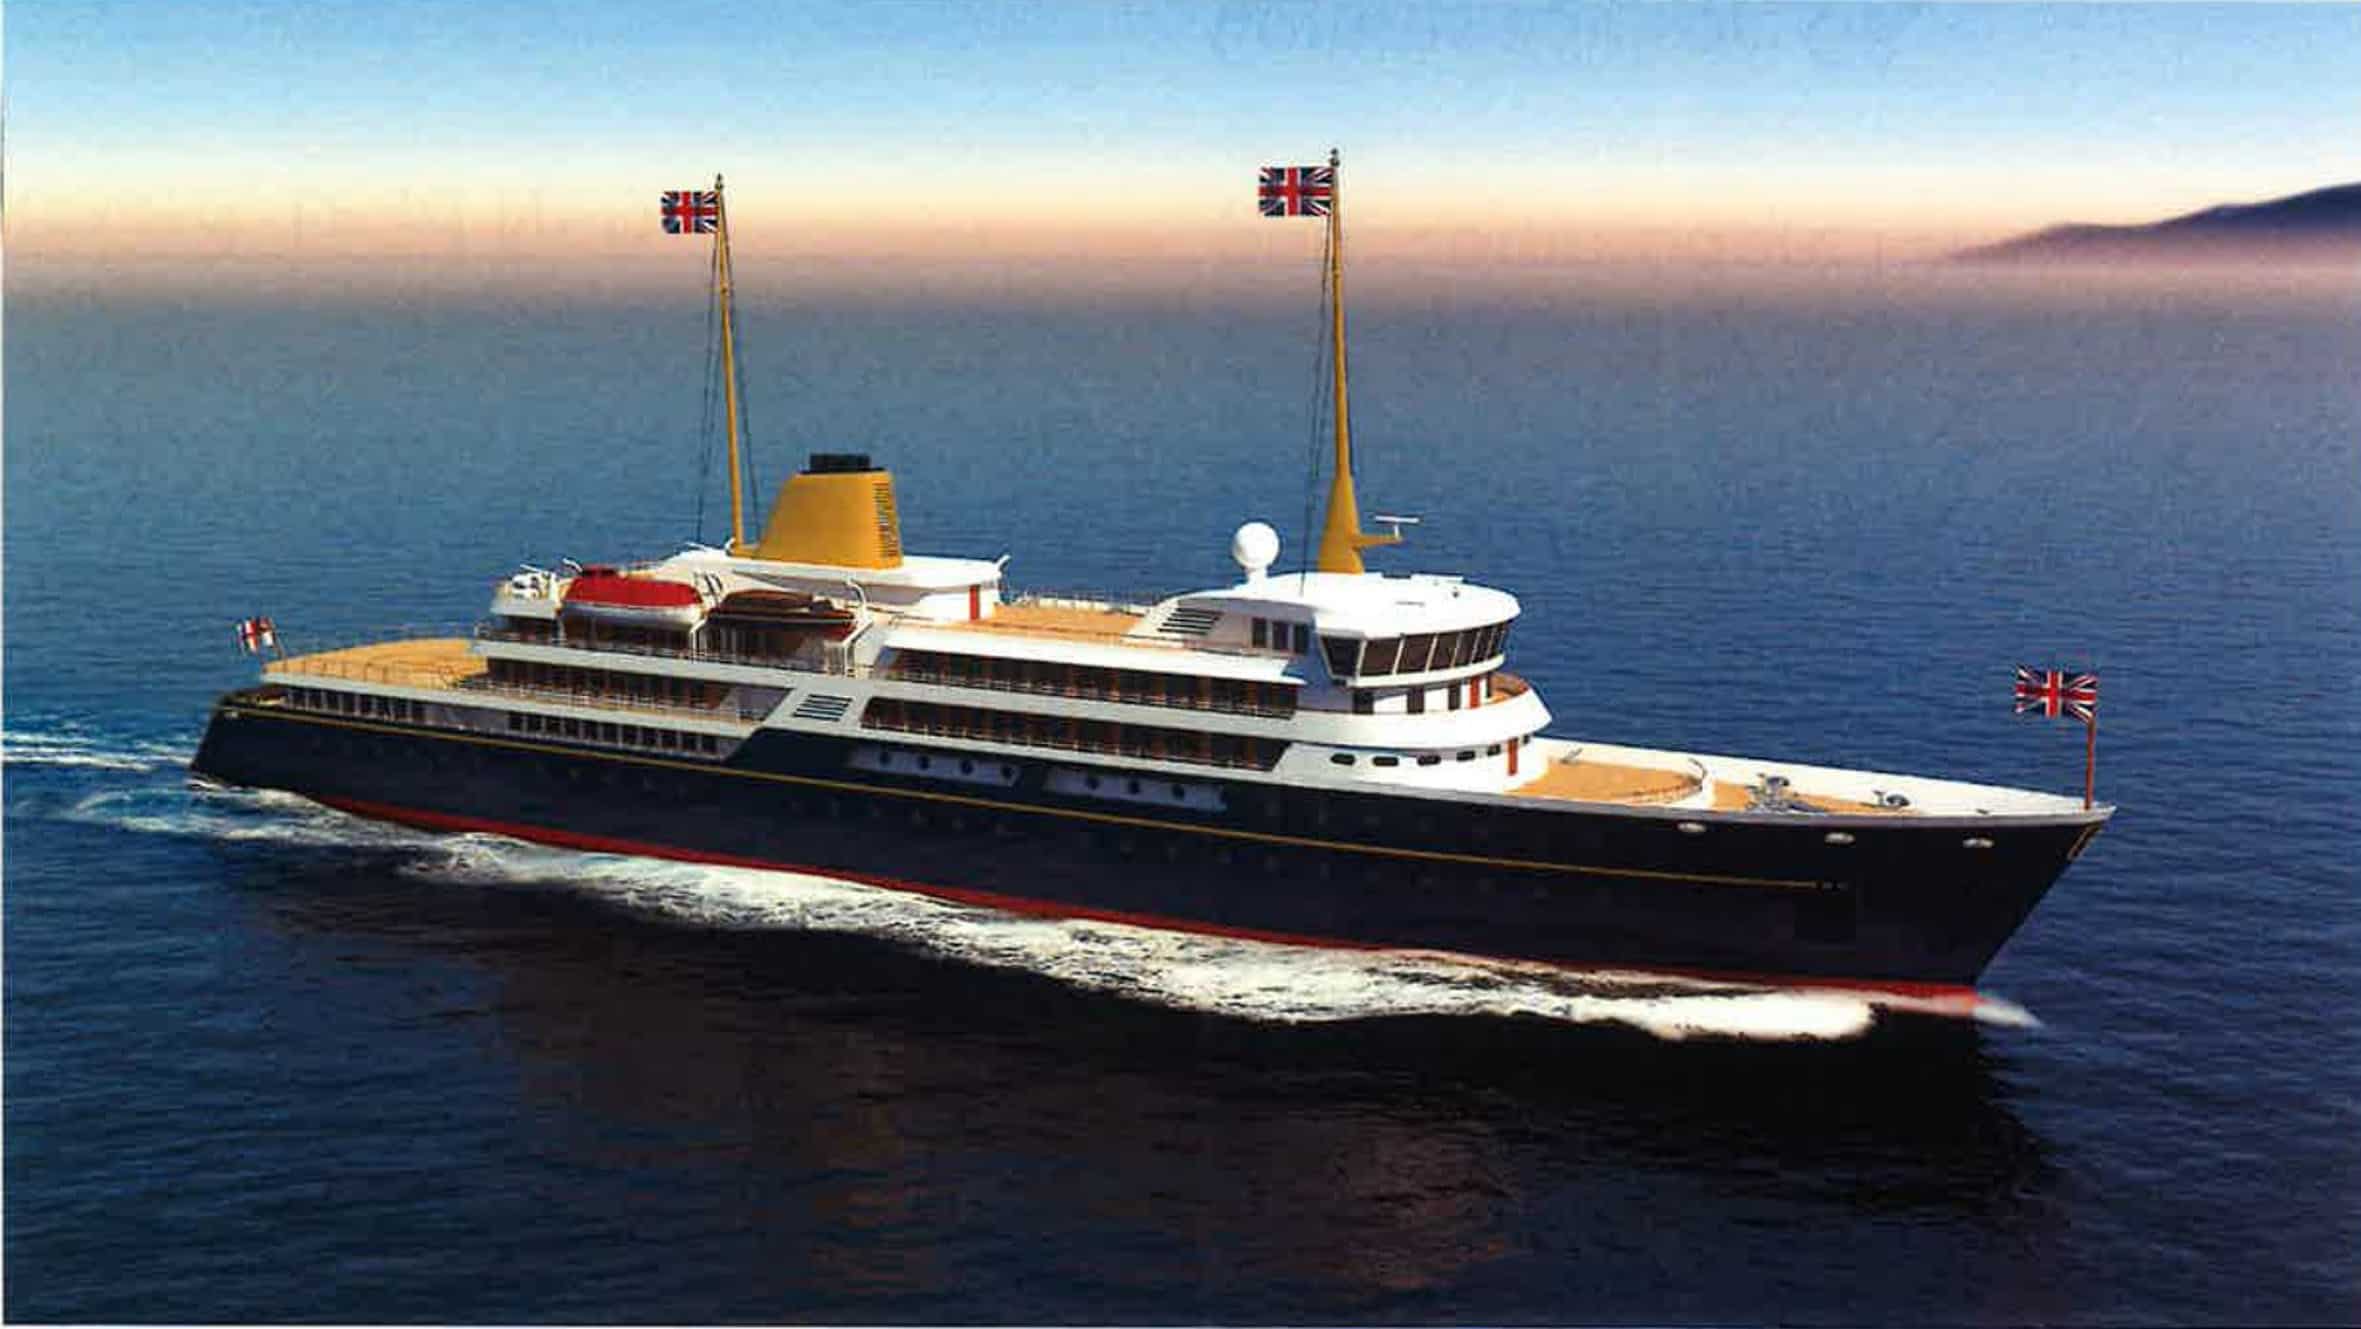 Boris claims £200m royal yacht will help Britain ‘show itself off to the world’